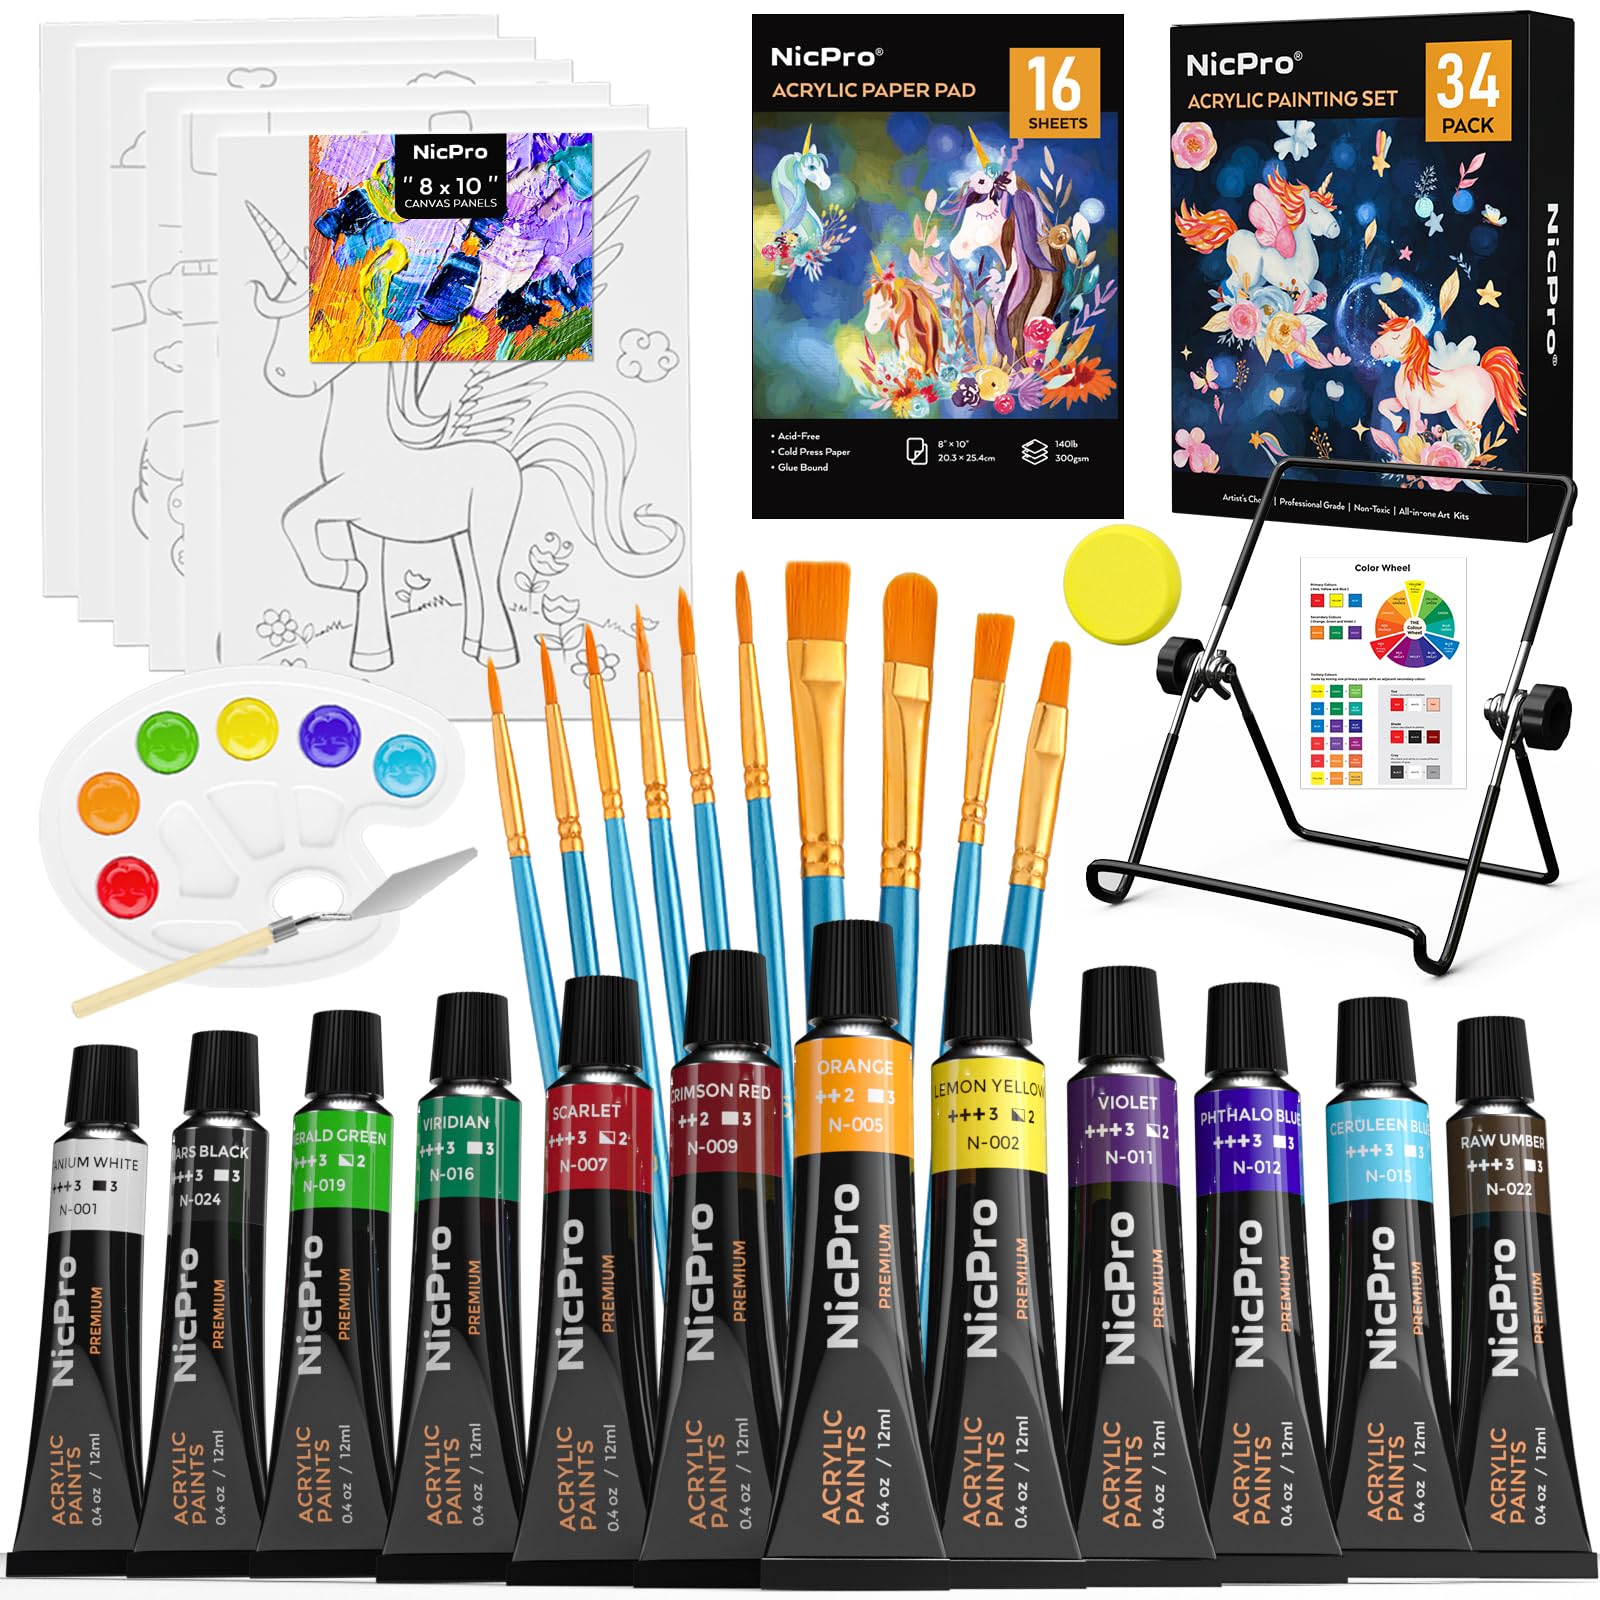 Nicpro 34PCS Kids Acrylic Paint Set with Pattern Canvas, Art Painting Supplies Kit with 12 Paints, 10 Brushes, 6 Canvas Panels, Table Easel, Paper Pad,Color Wheel,Palette for Beginner Student Toddlers